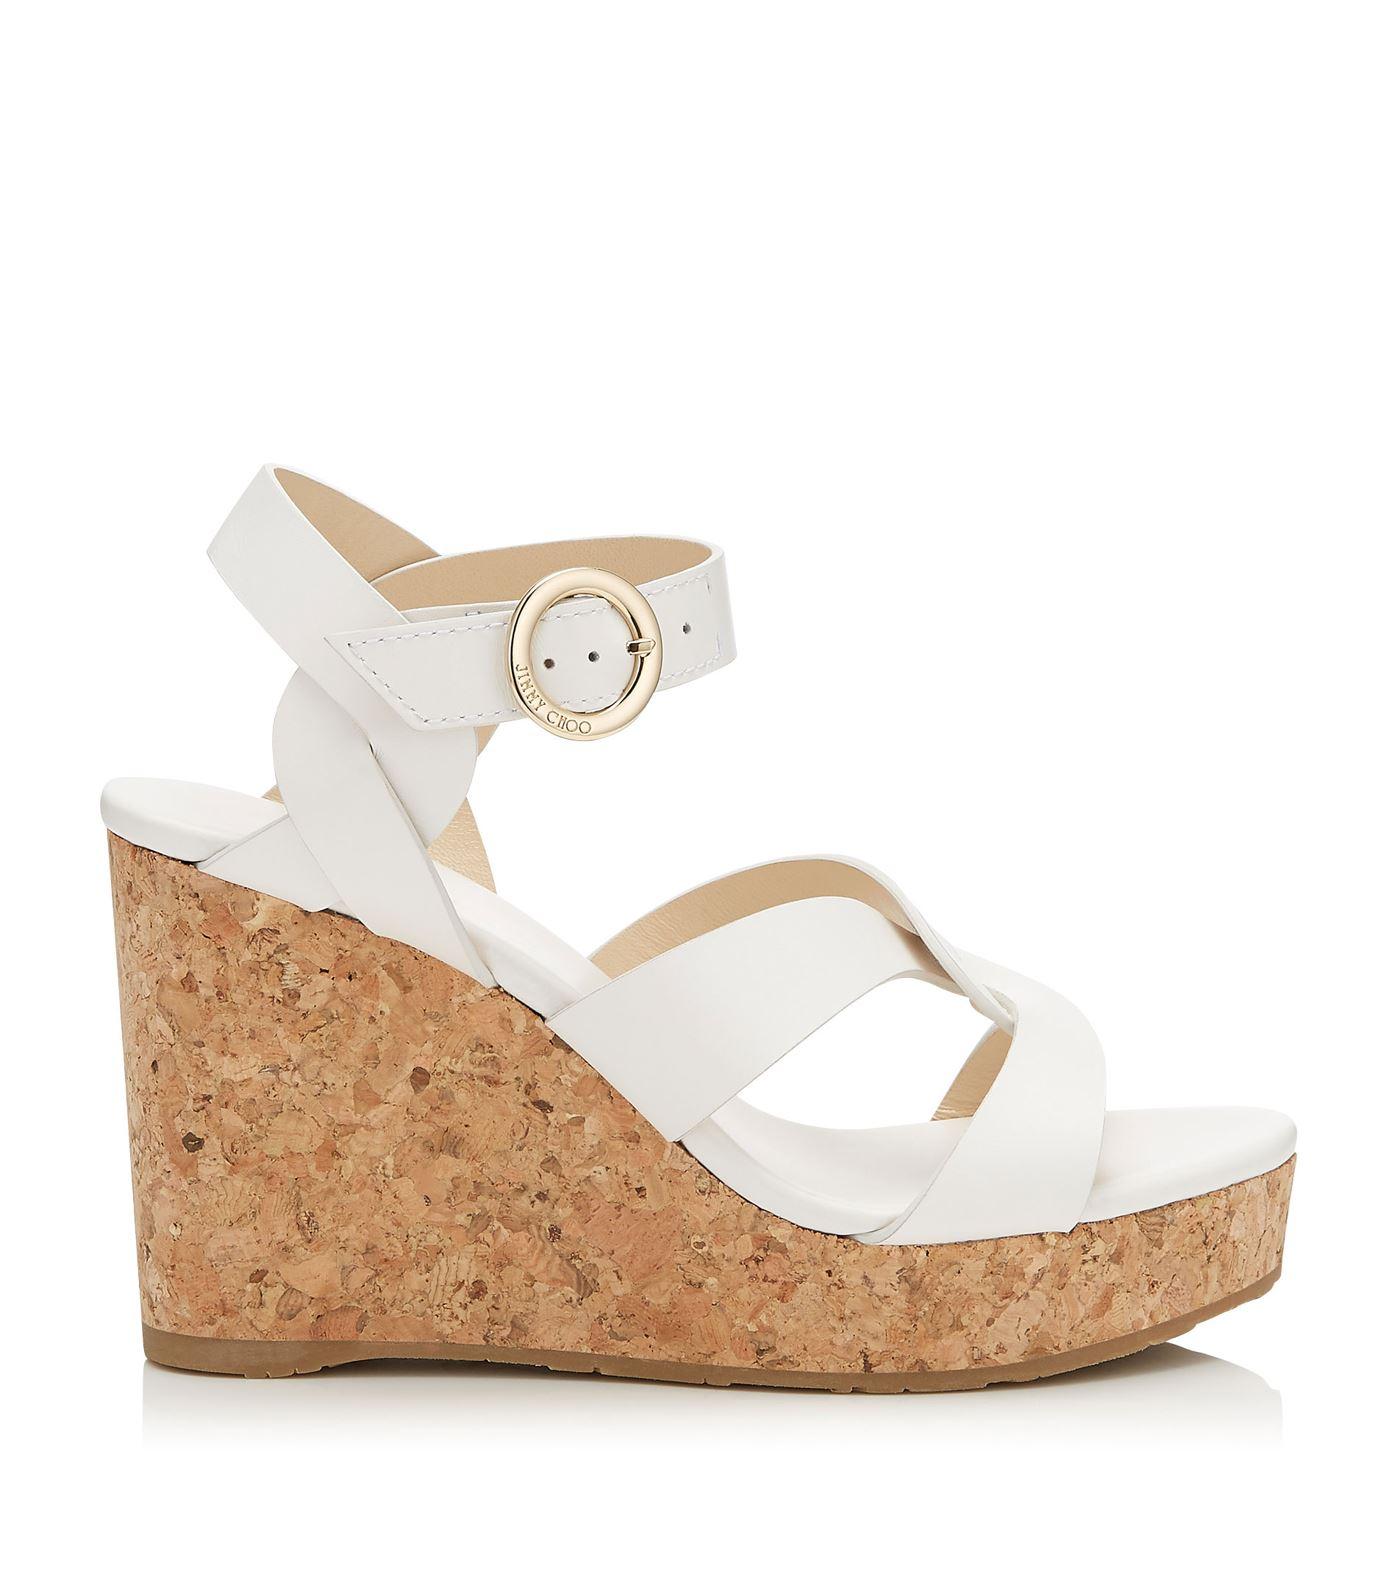 Jimmy Choo Leather Aleili 100 Sandals in White - Lyst